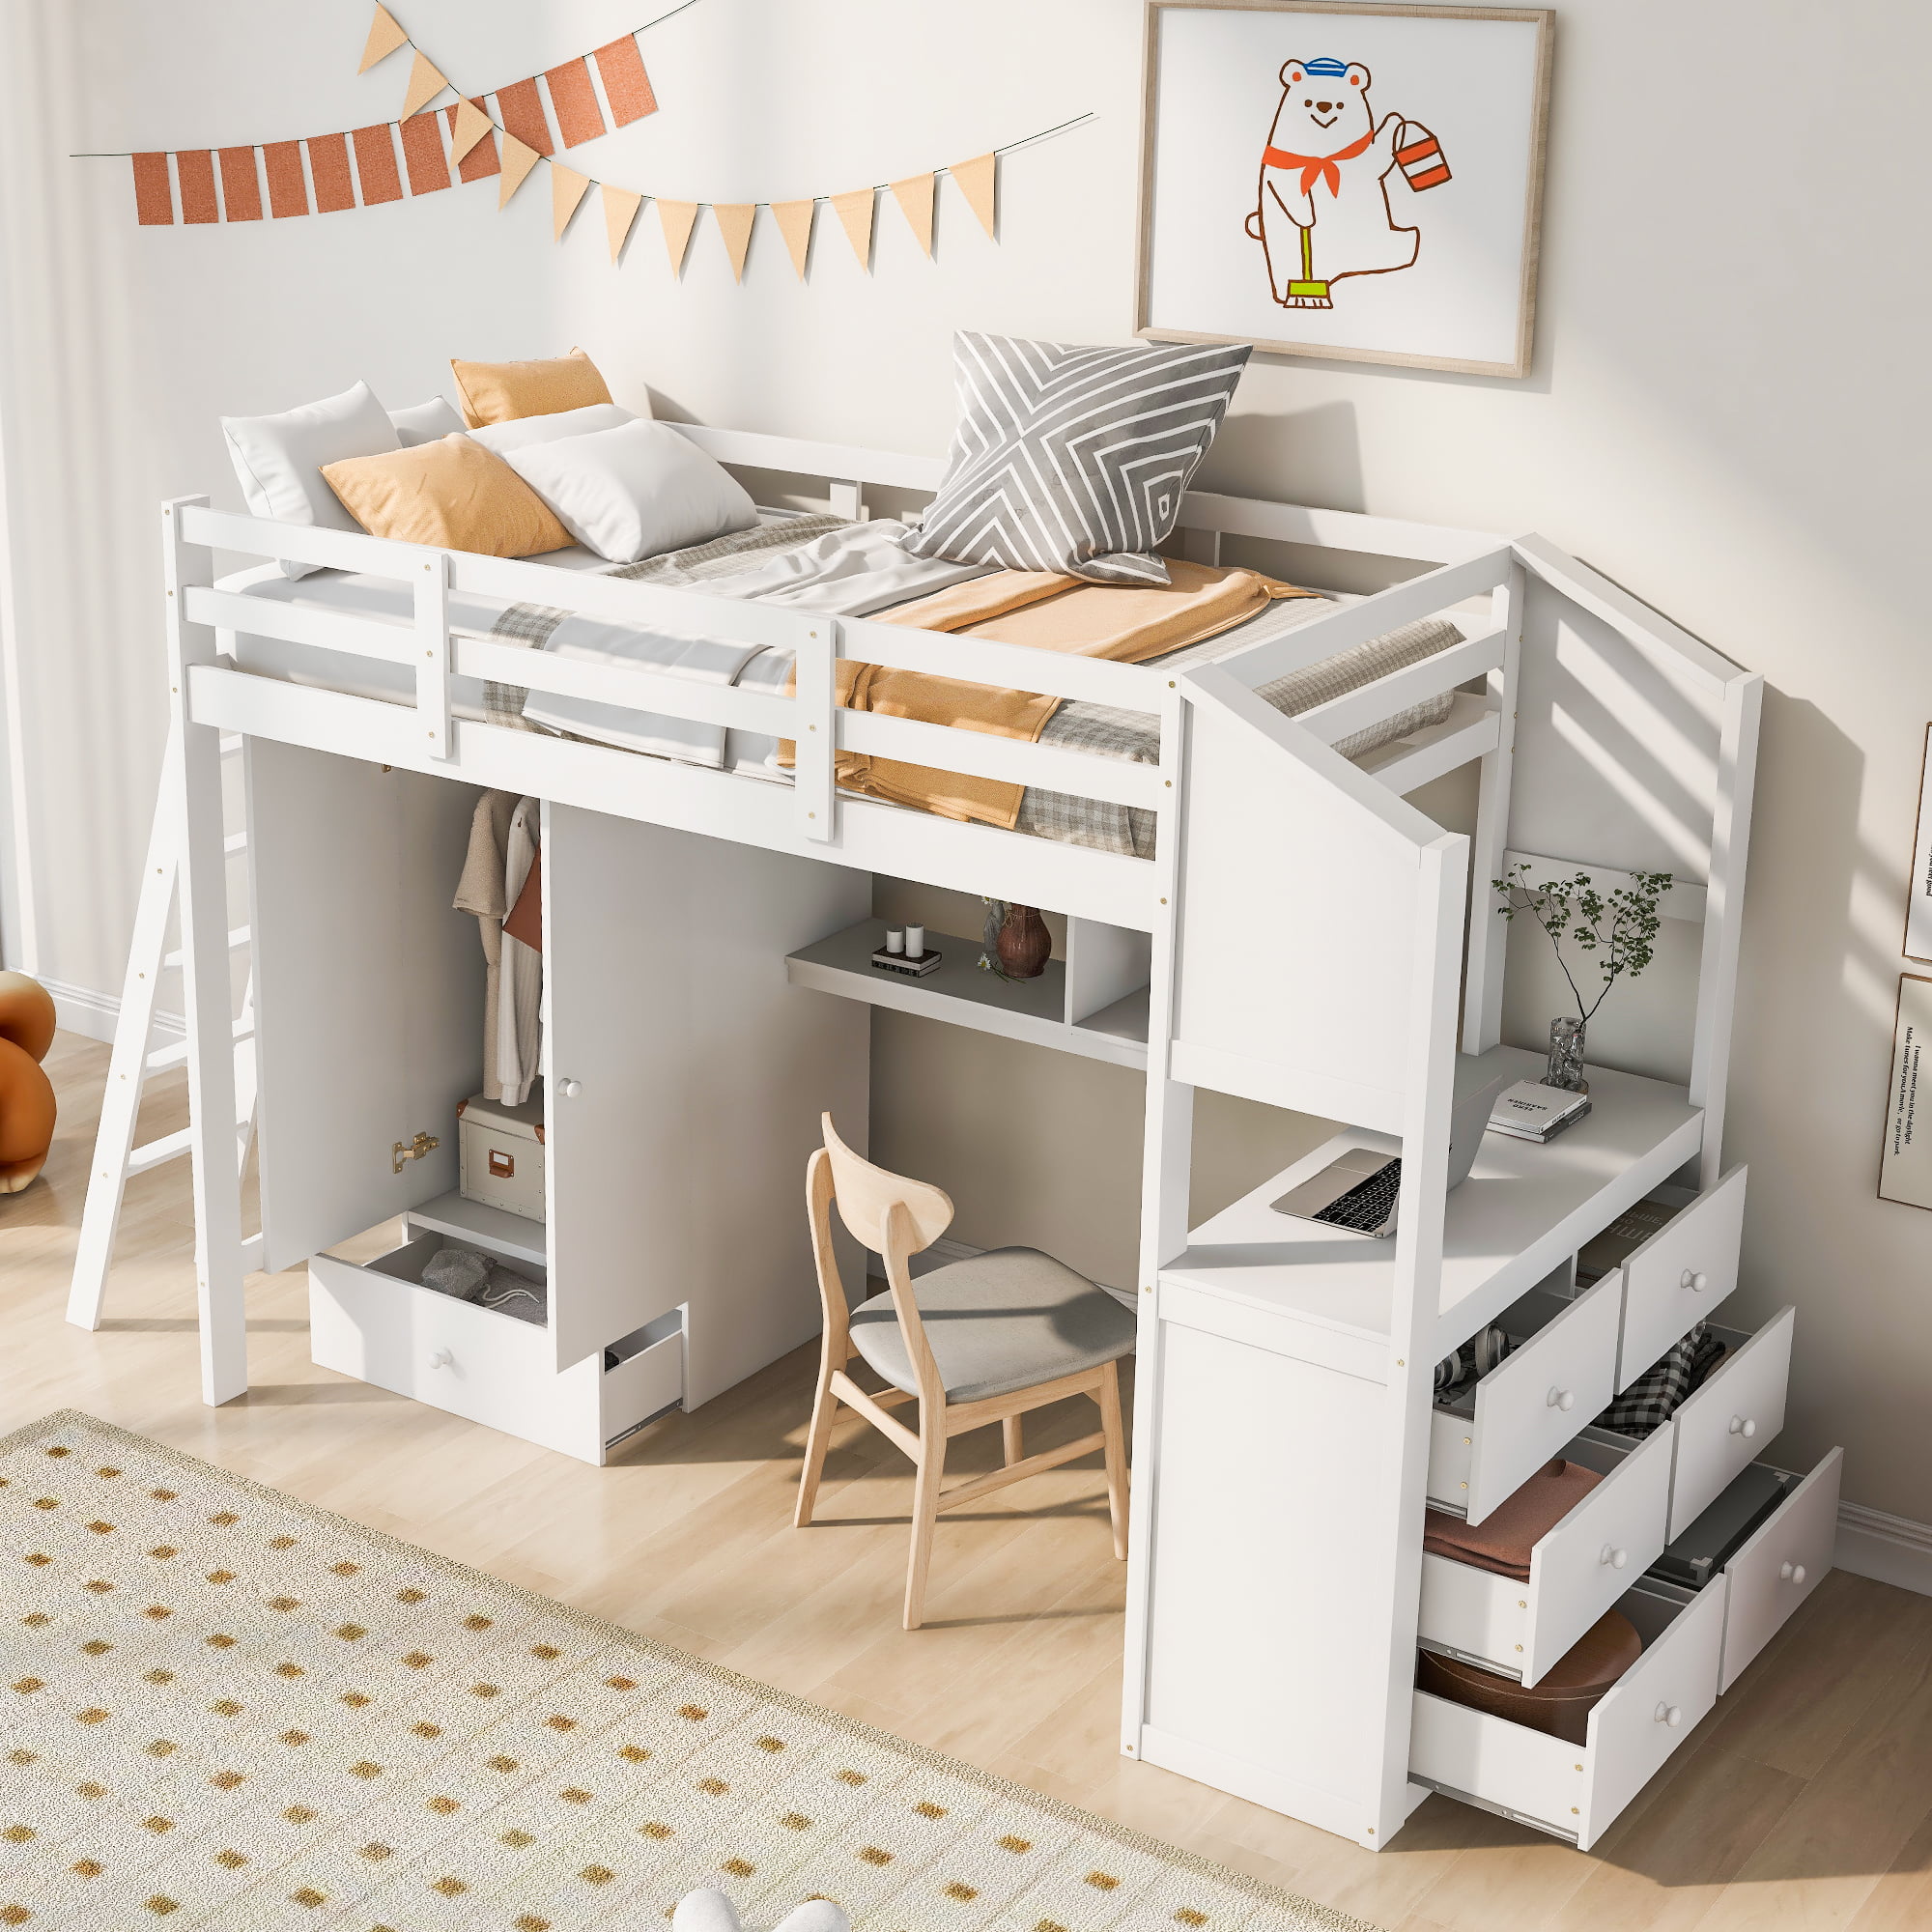 Twin Size Loft Bed With Wardrobe And Drawers, Attached Desk With Shelves